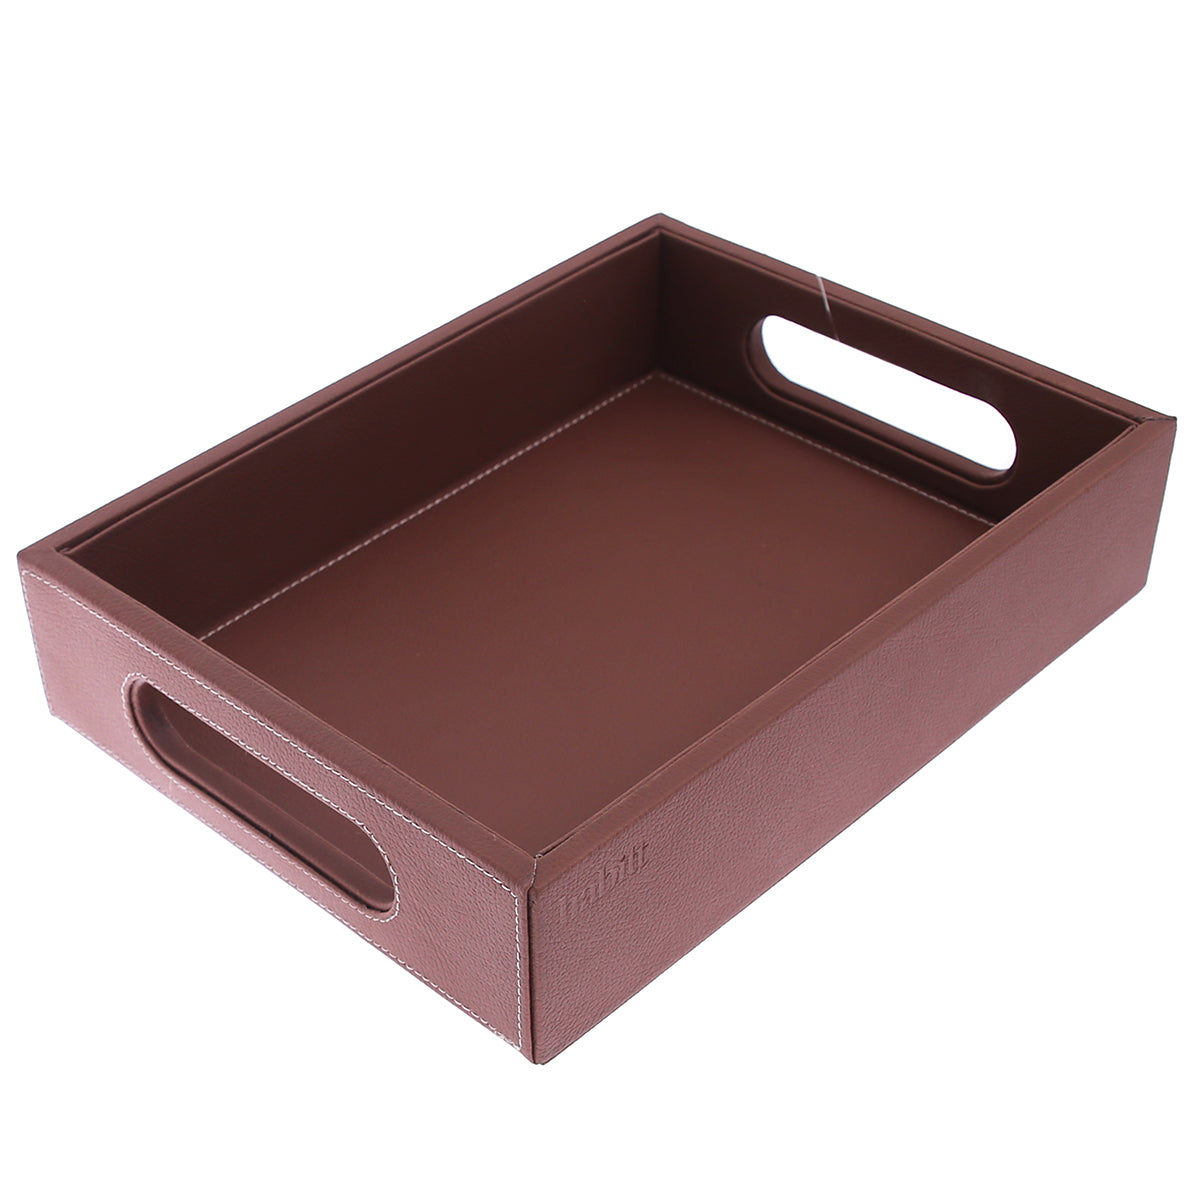 Leatherette Tray Brown S